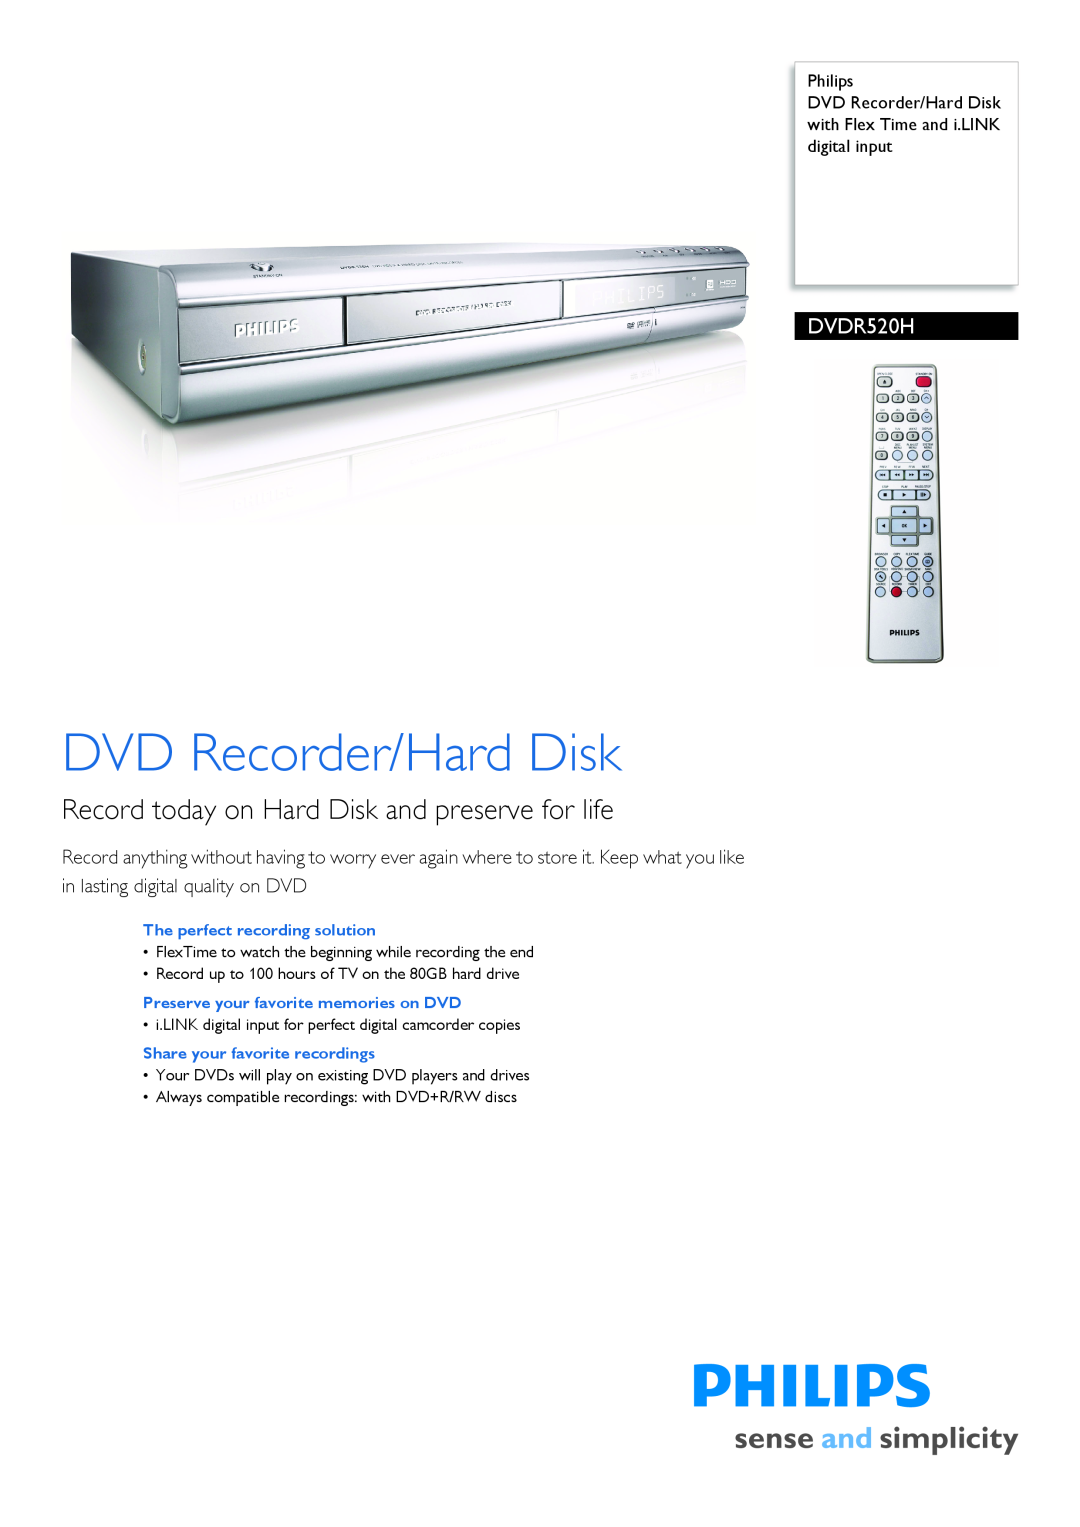 Philips DVDR520H/97 manual Philips, DVD Recorder/Hard Disk with Flex Time and i.LINK digital input 